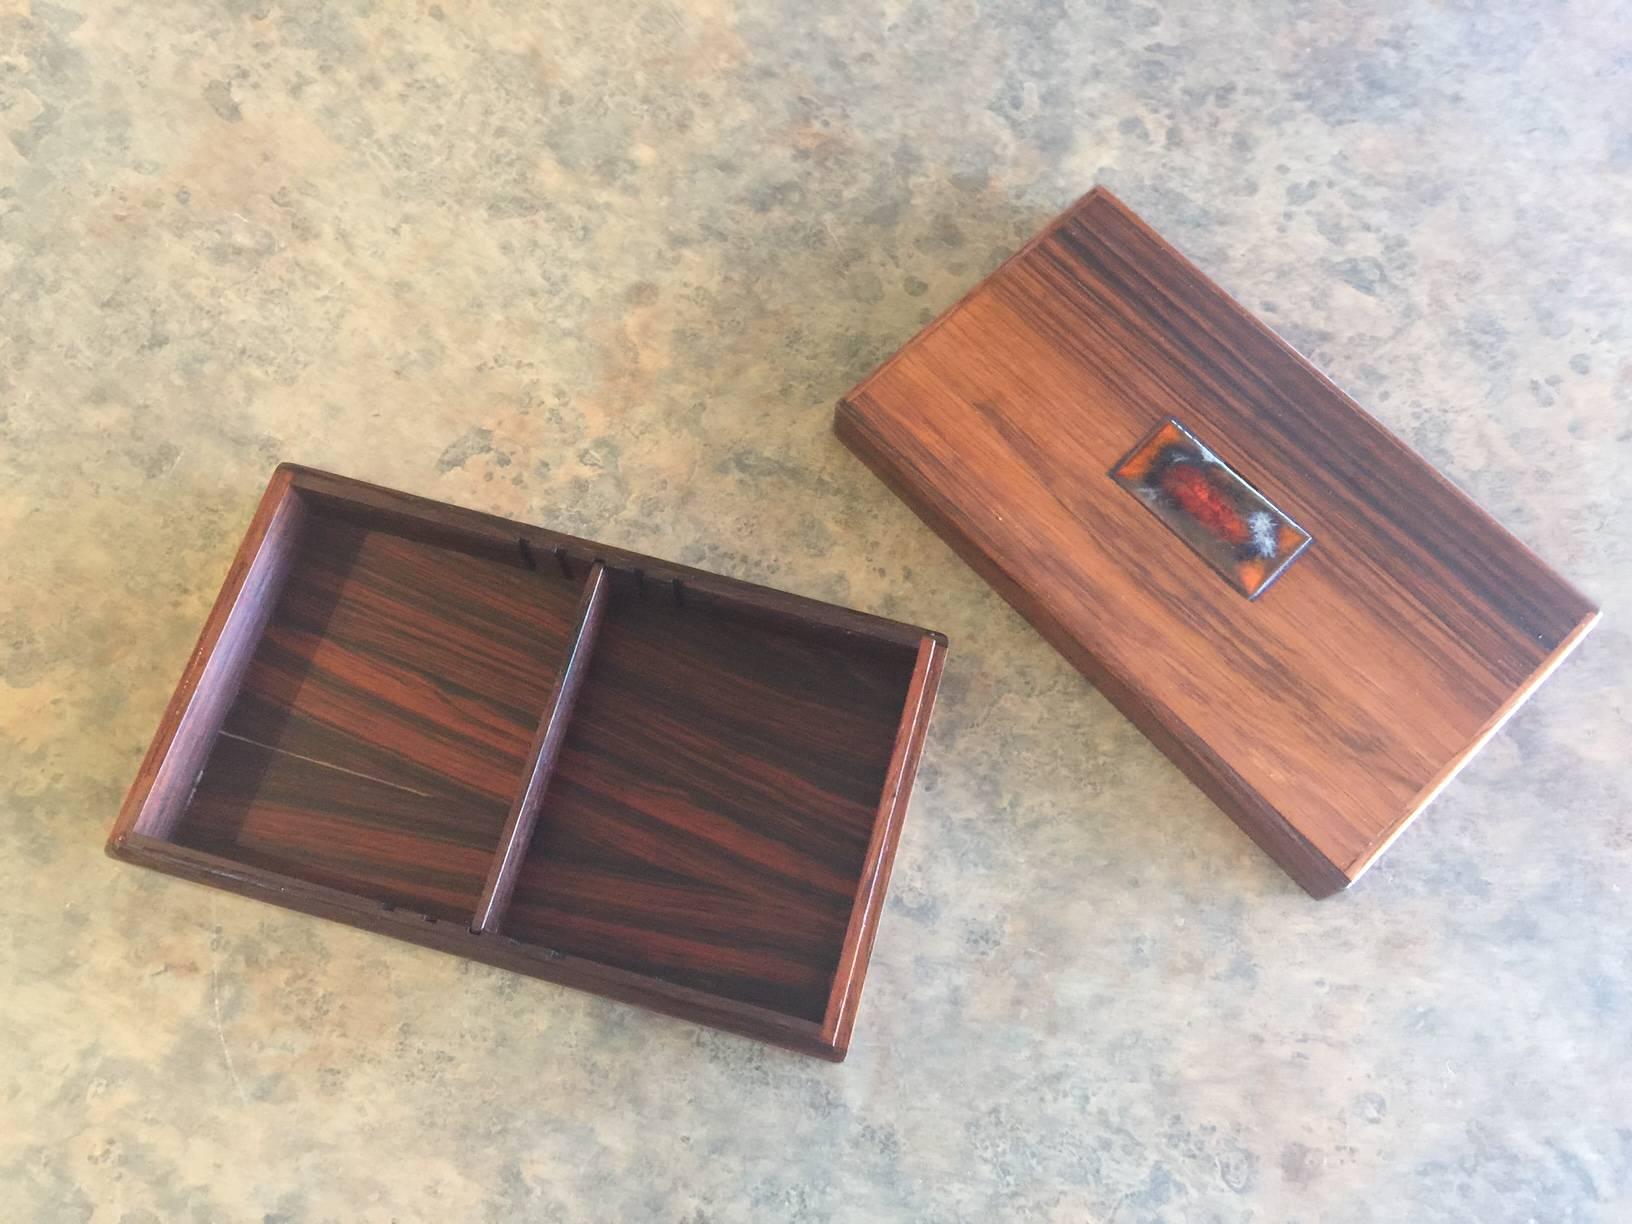 Bodil Eje Danish Rosewood Box / Humidor by Alfred Klitgaard In Excellent Condition For Sale In San Diego, CA